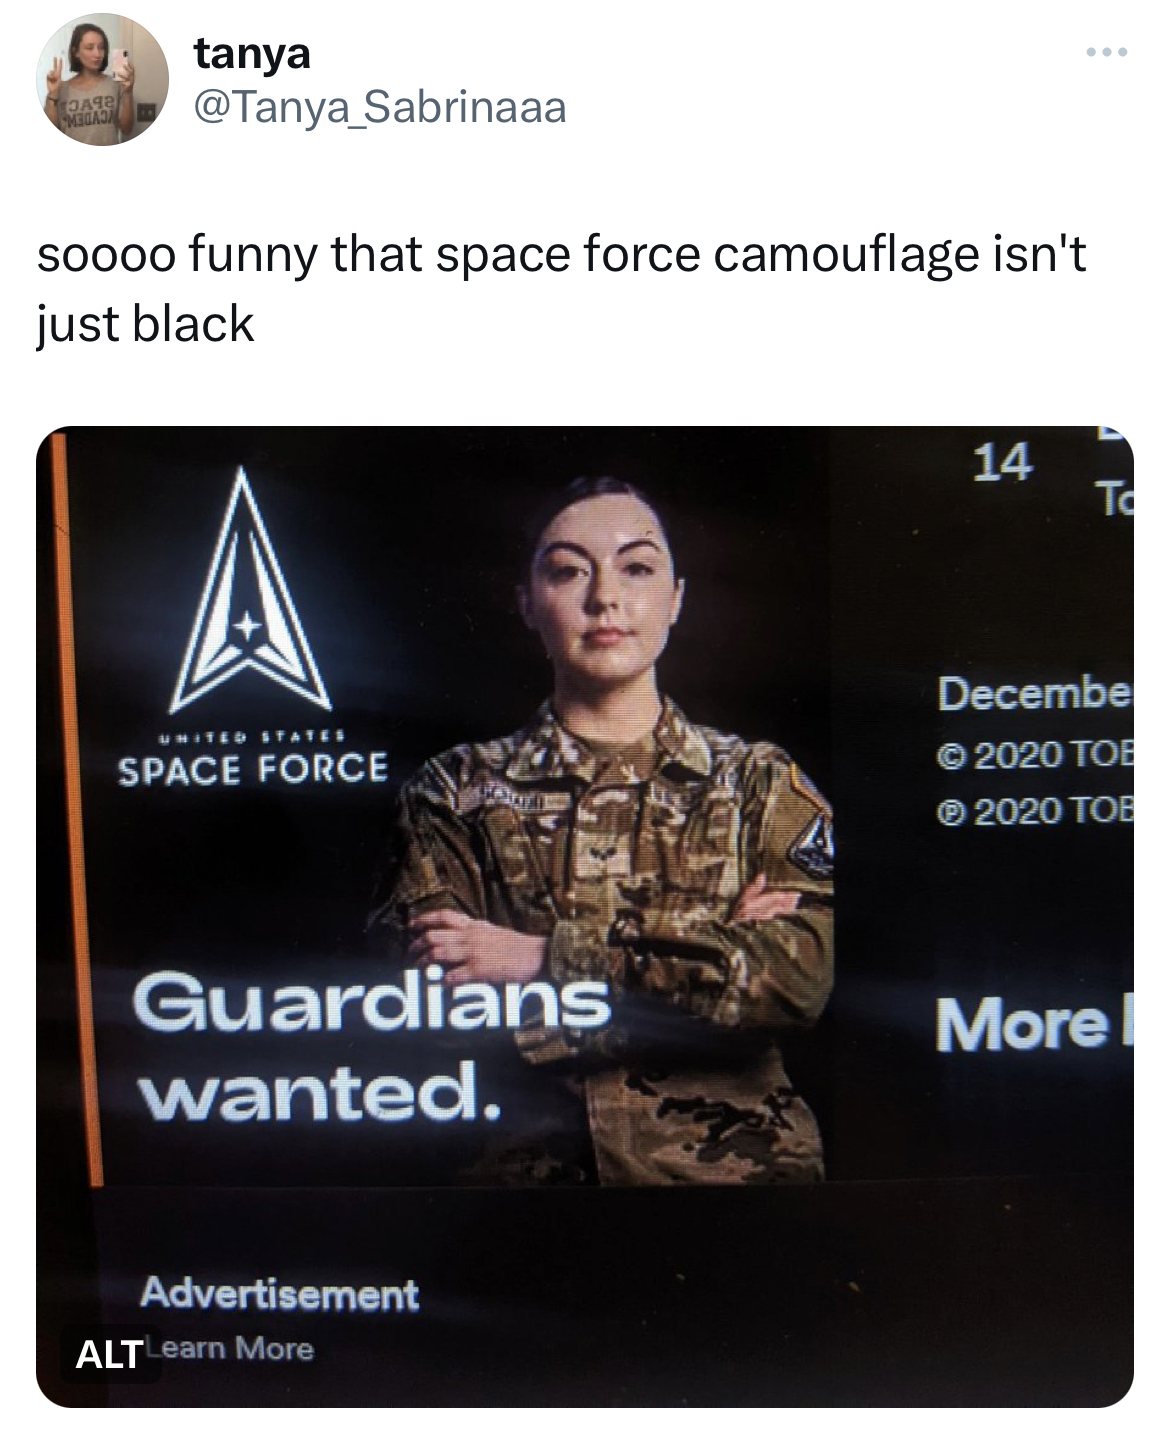 savage tweets - tanya Sabrinaaa soooo funny that space force camouflage isn't just black United Stater Space Force Guardians wanted. Advertisement Alt Learn More 14 To Decembe 2020 Tob 2020 Tob More